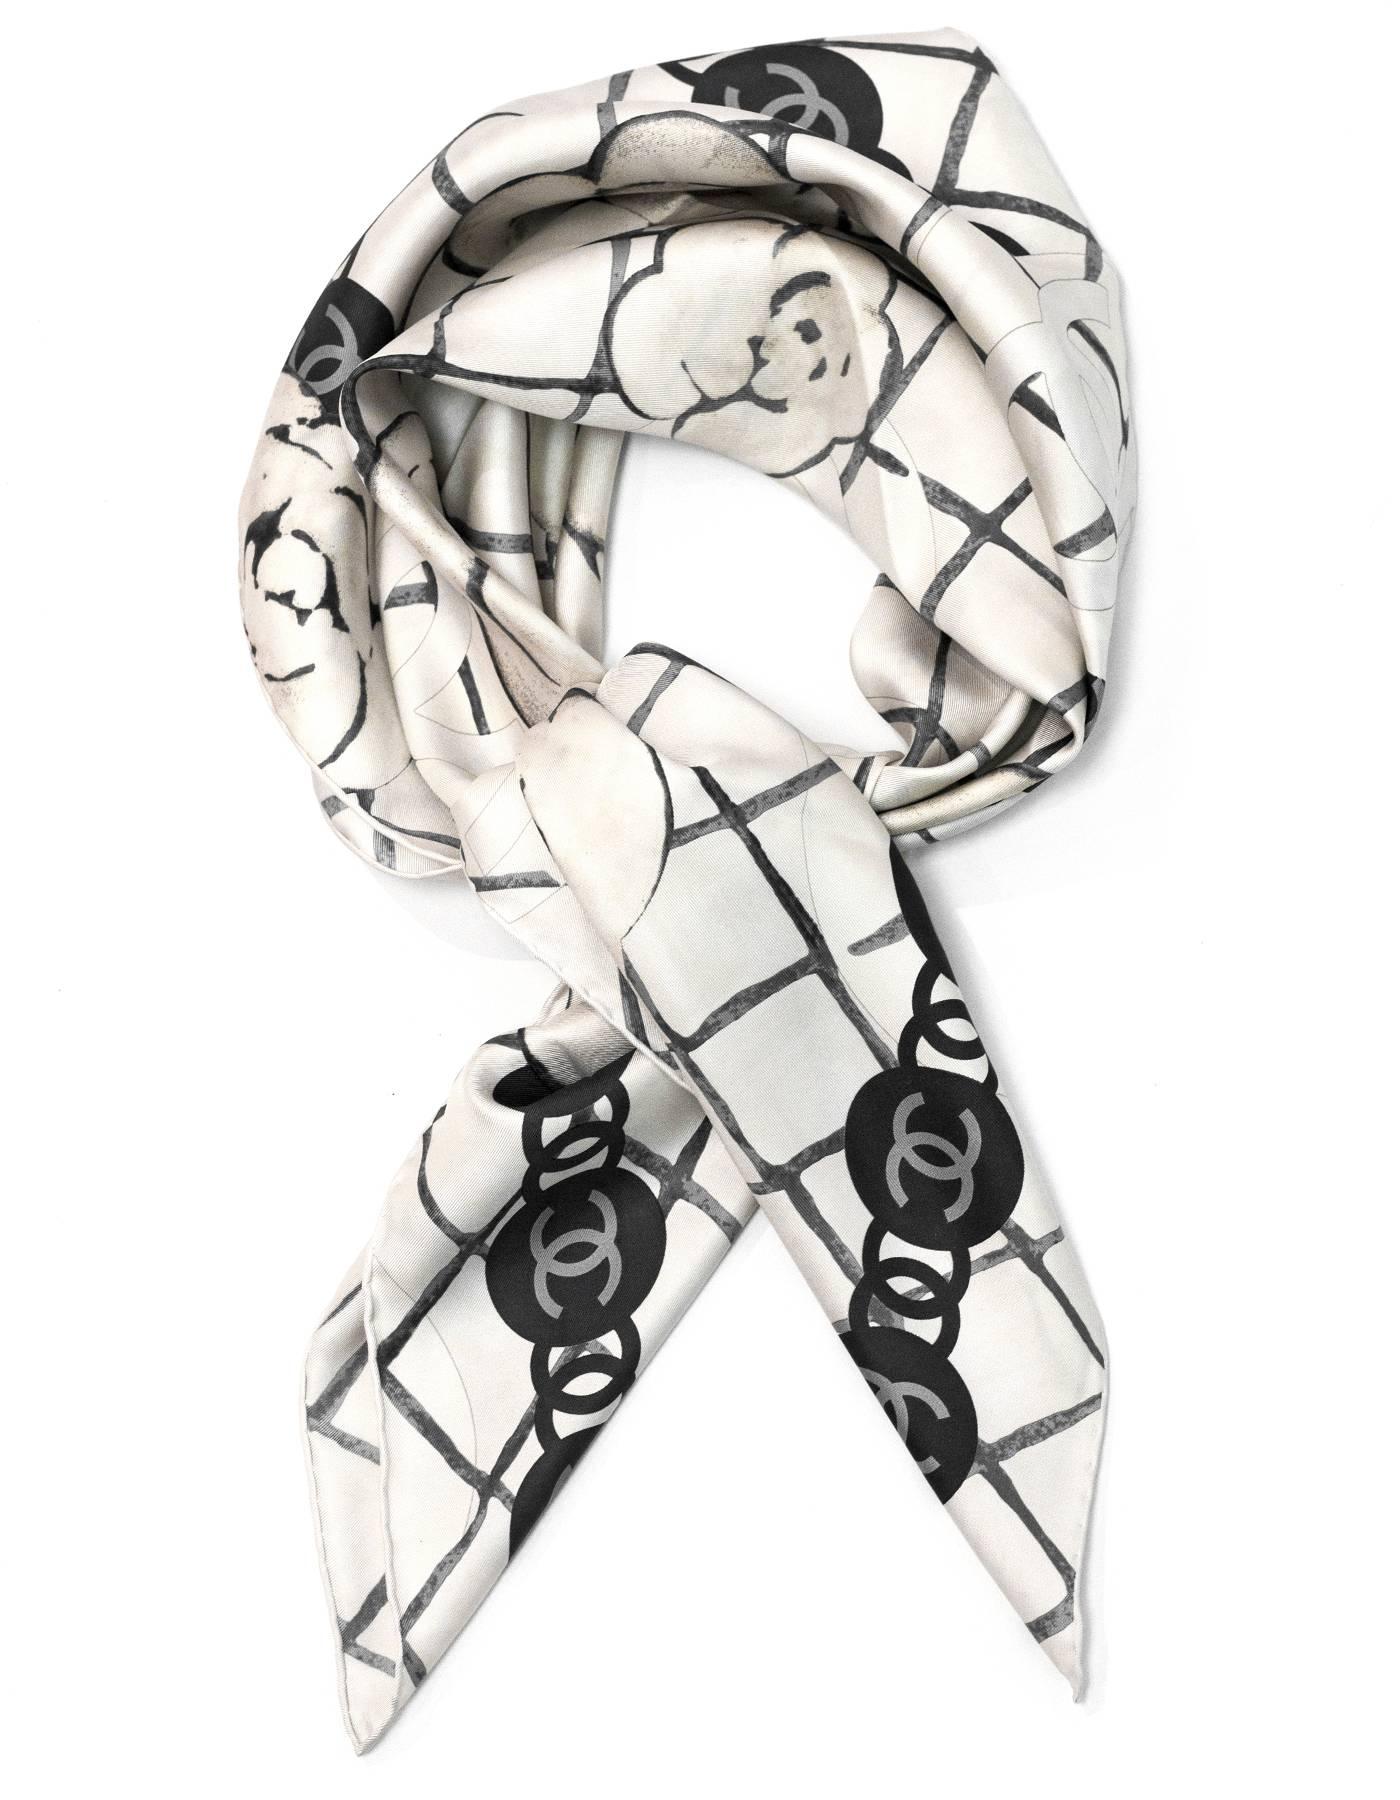 Chanel White & Grey CC Camelia Silk Scarf

Made In: Italy
Color: Grey, white
Composition: 100% silk
Overall Condition: Excellent pre-owned condition
Included: Chanel box and ribbon

Measurements:
Length: 35"
Width: 35"